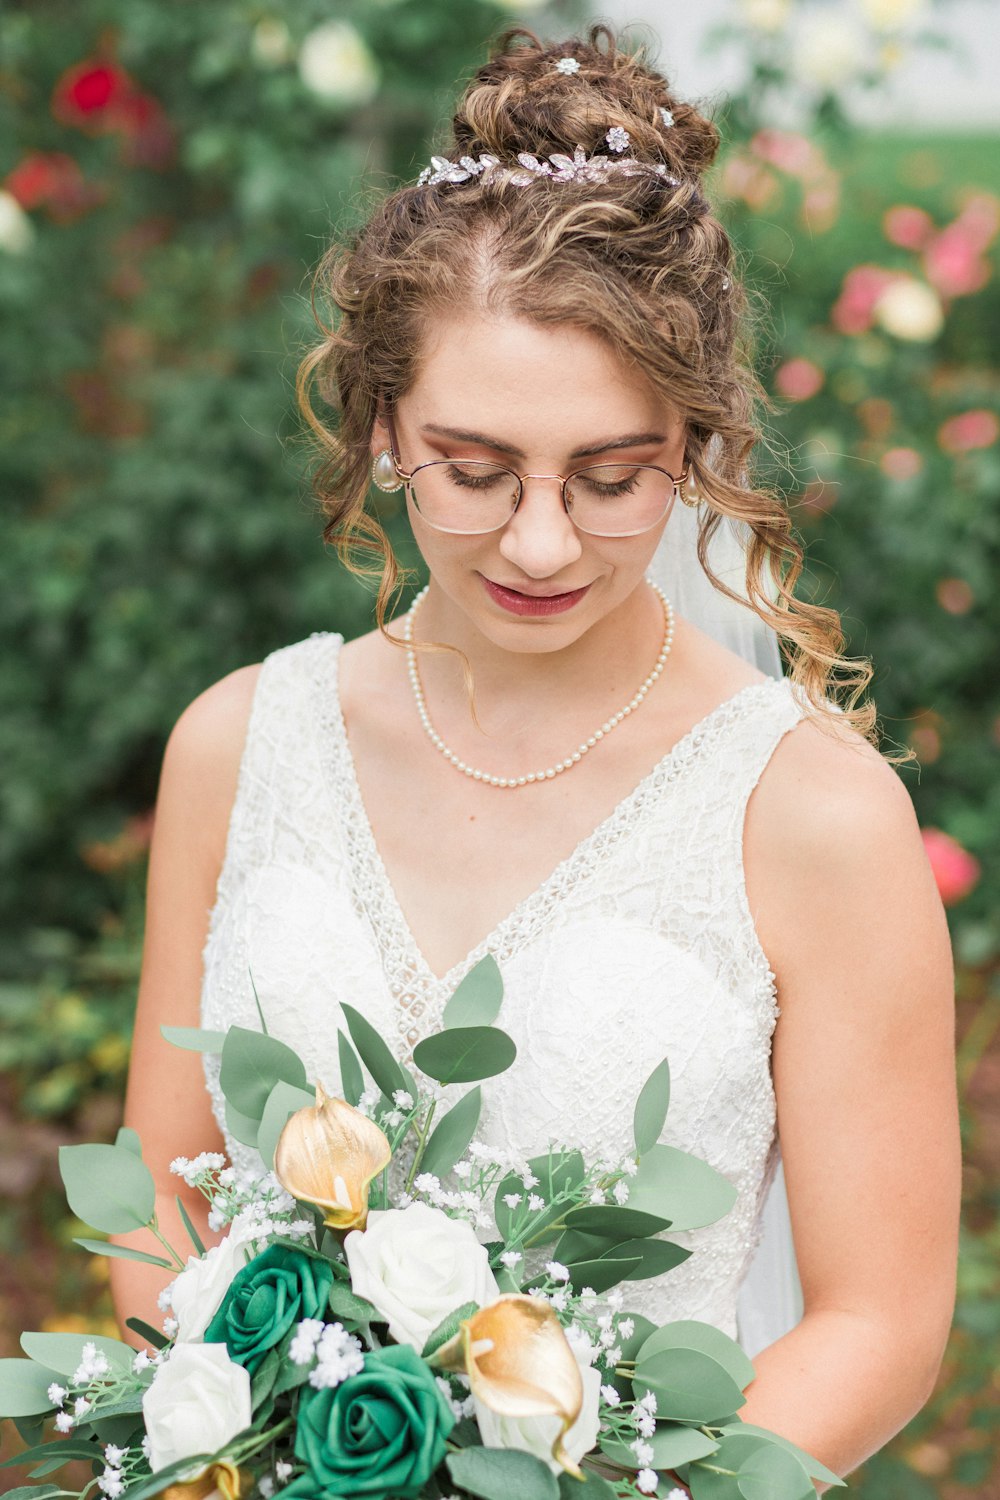 a bride holding a bouquet of flowers in her hands